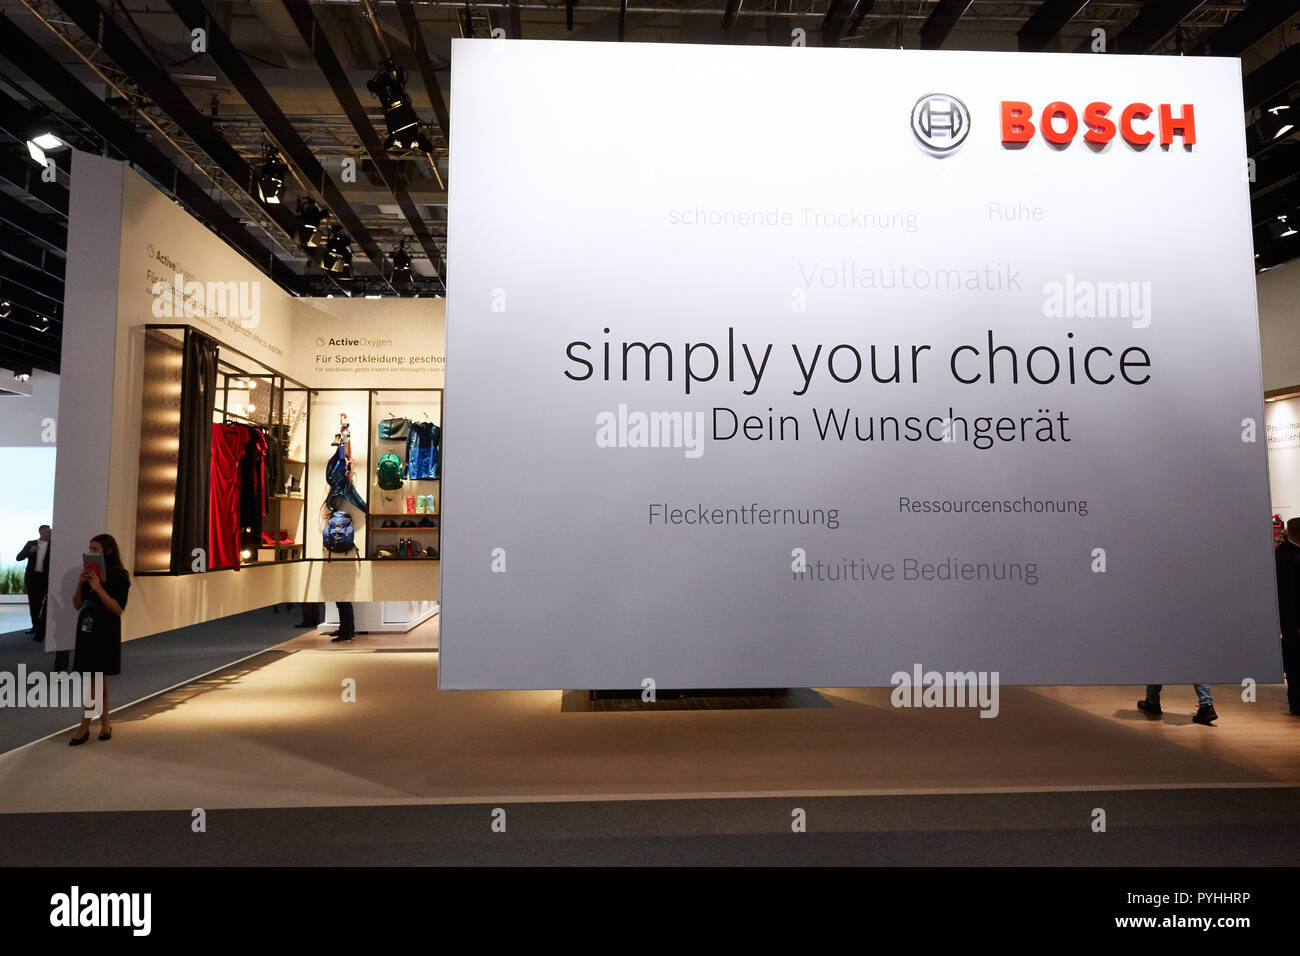 Berlin, Germany - The German company BOSCH will present its innovations in the field of household appliances at IFA 2018. Stock Photo